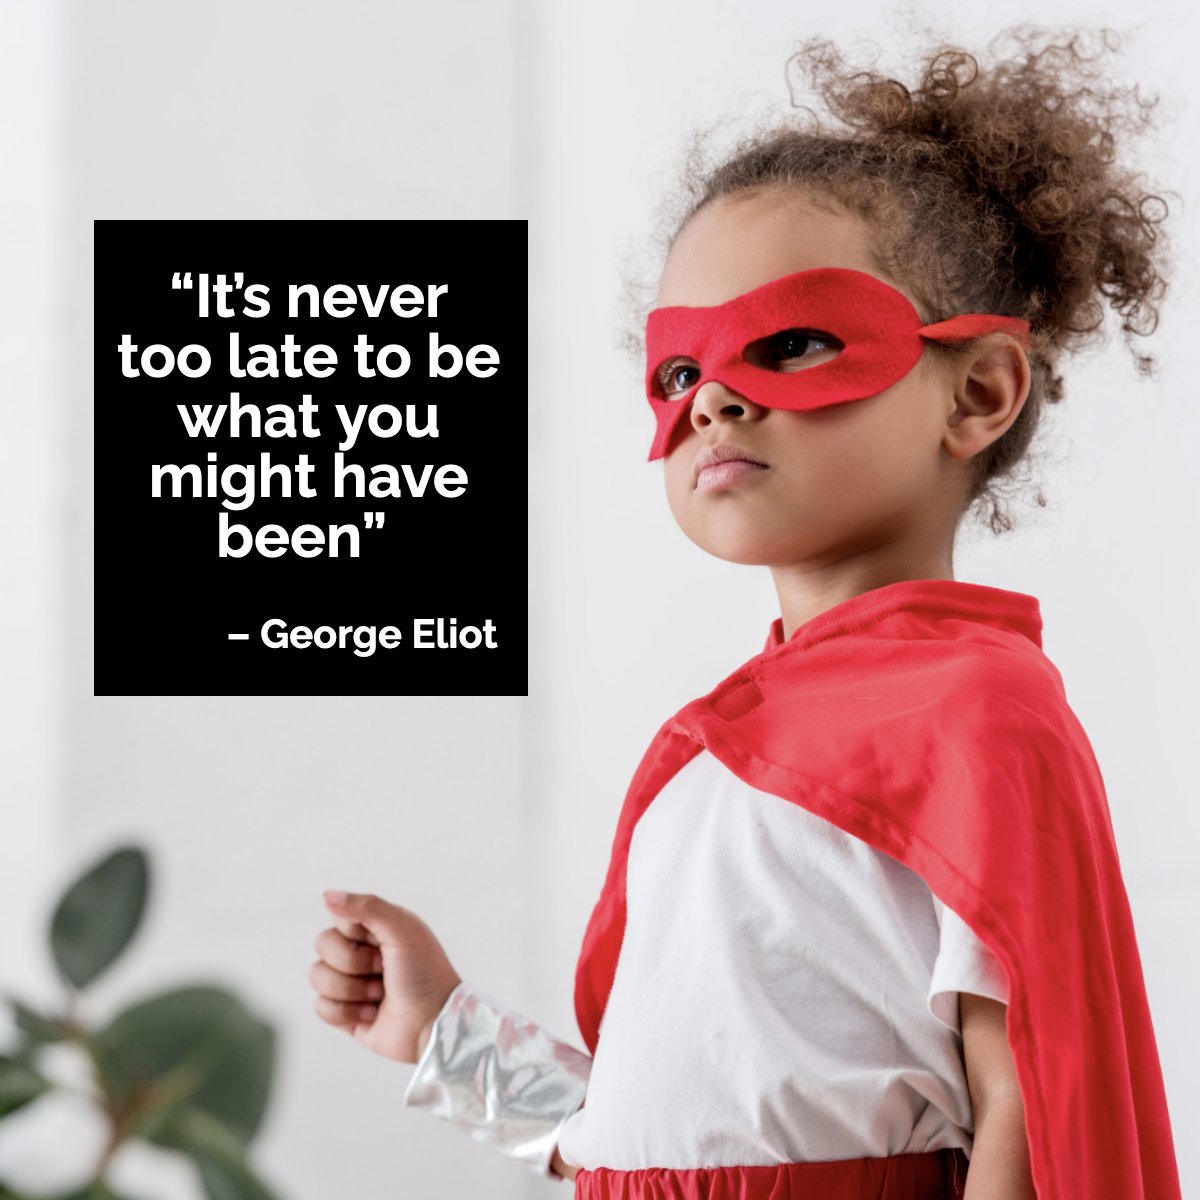 'It's never too late to be what you might have been'

#inspiring #inspirational #quote #quoteoftheday✏️ #quotestagram
 #RacingRealEstateAgent #BarrettRealEstate #StoneTreeRealEstateTeam #maricopaazrealestate #racingagent #arizonarealestate #phoenixrealestateagent